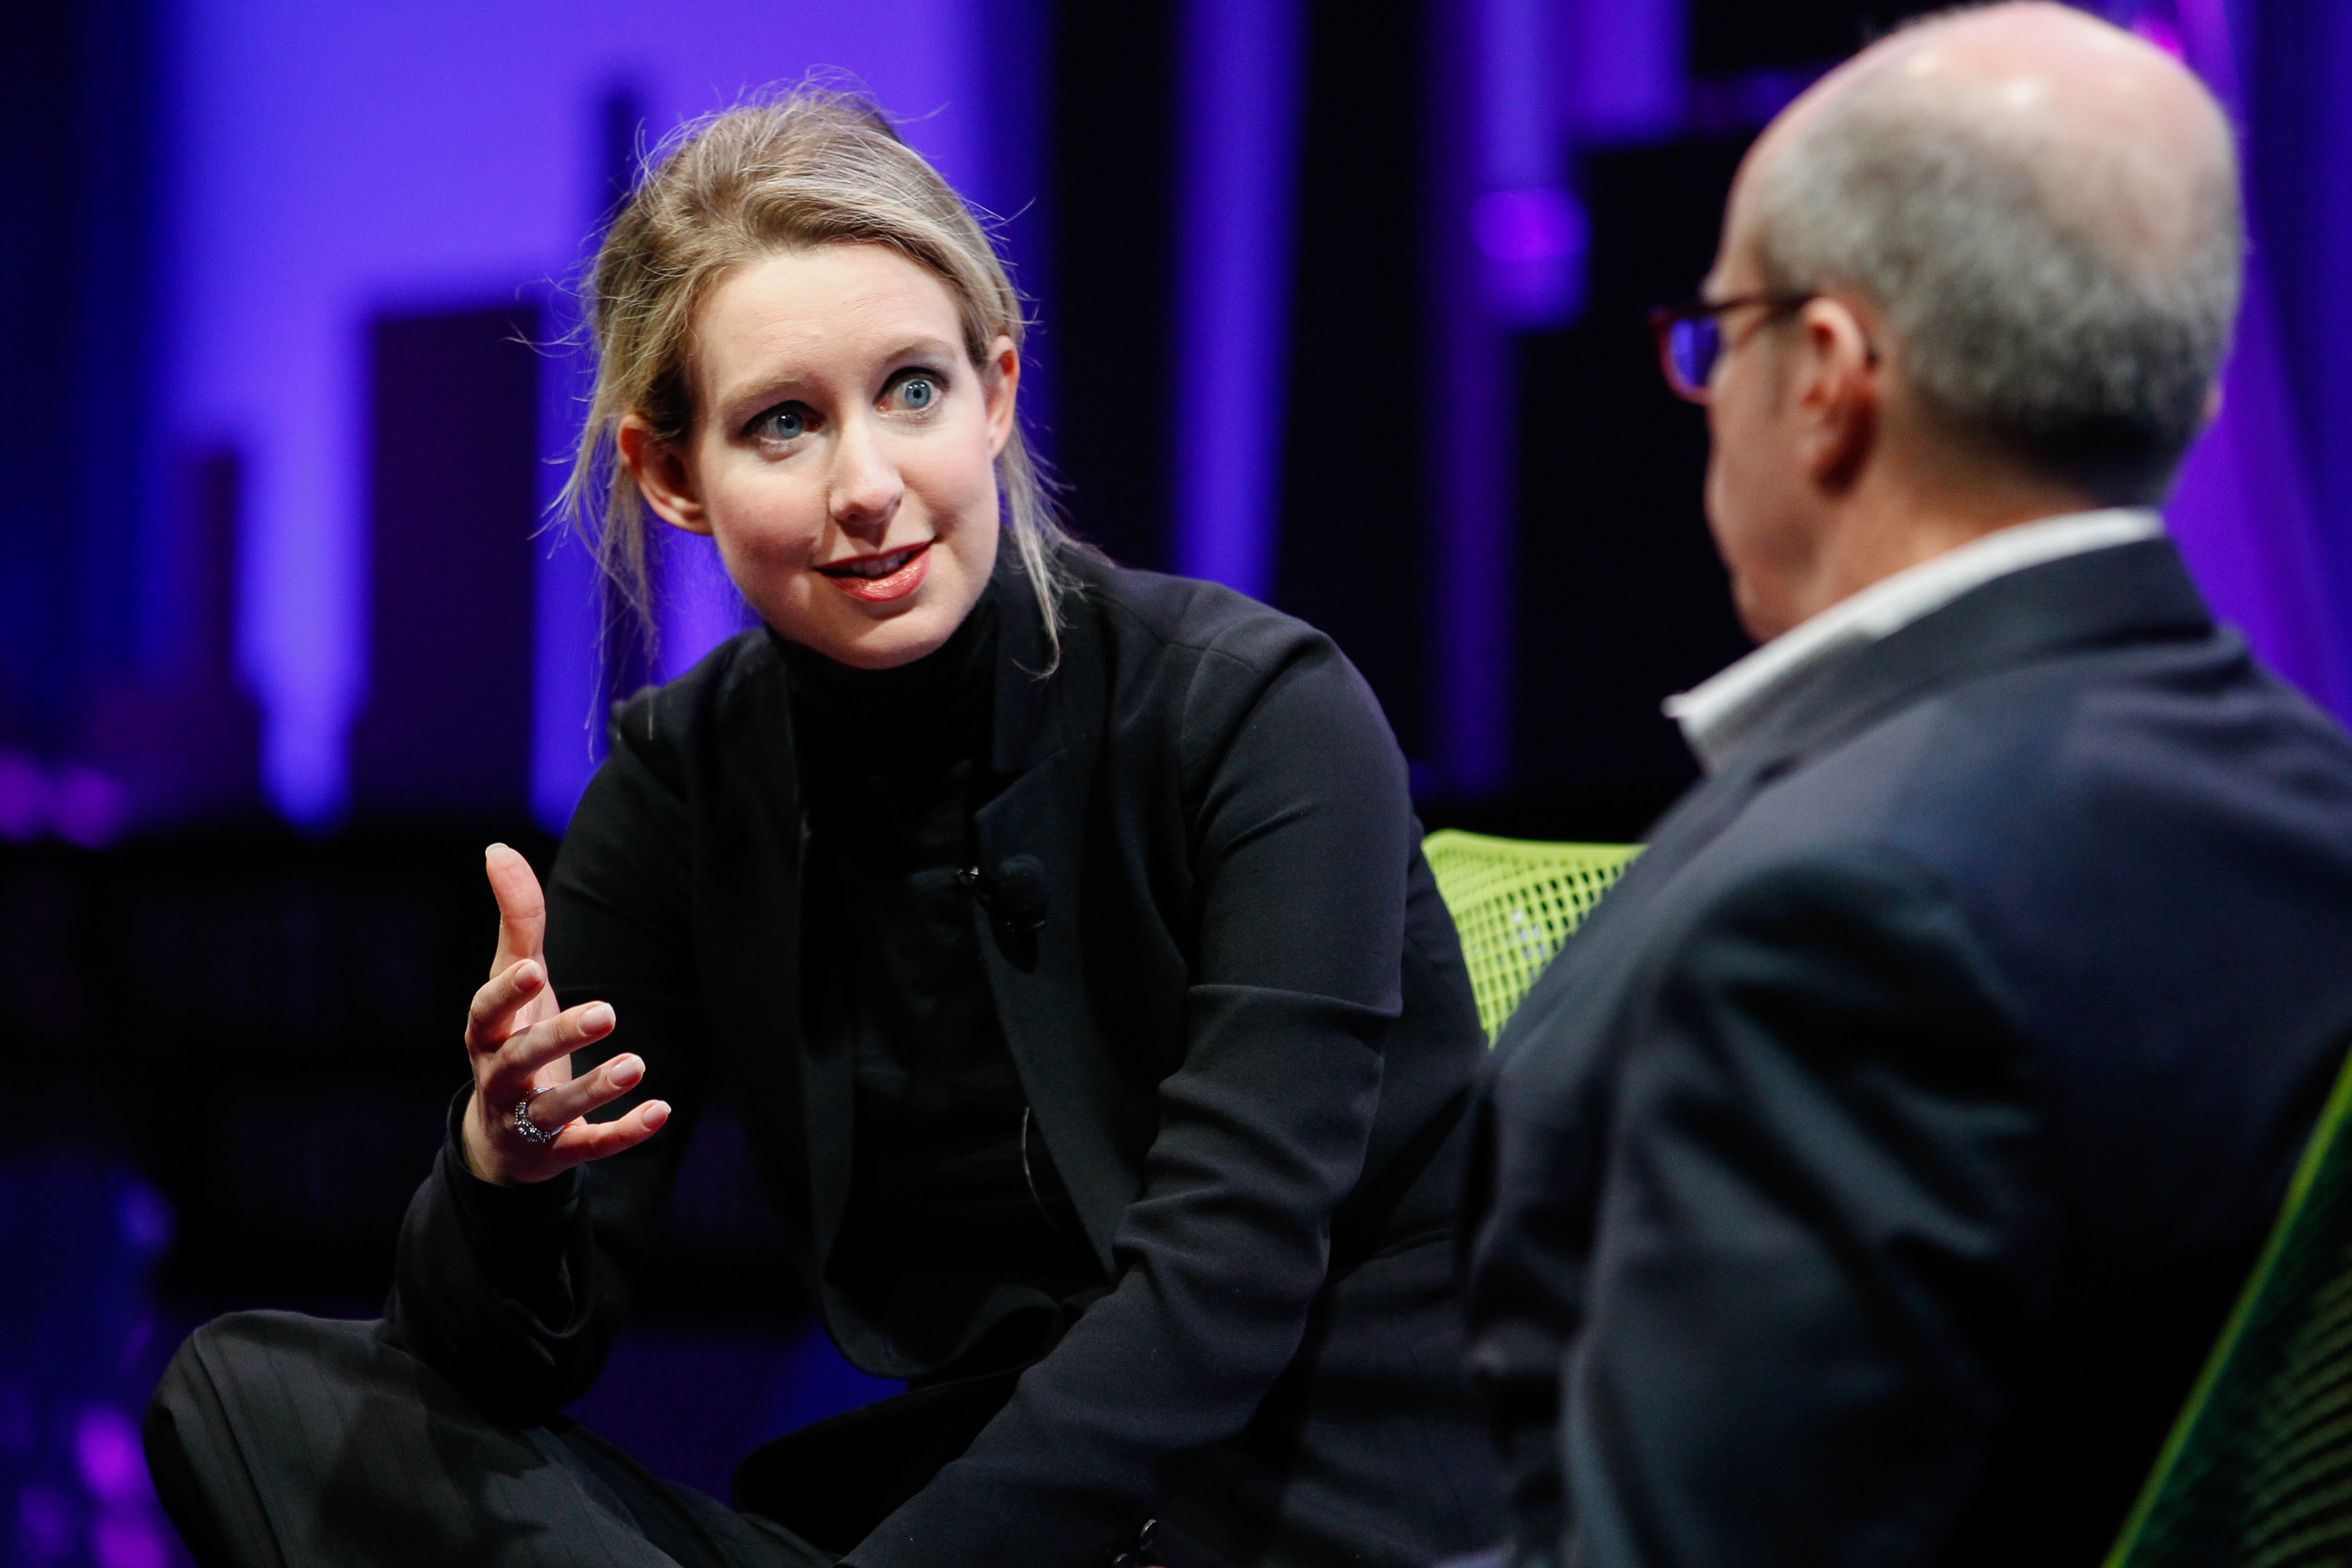 Elizabeth Holmes and Alan Murray at the Fortune Global Forum at the Fairmont Hotel on November 2, 2015, in San Francisco, California. | Source: Getty Images